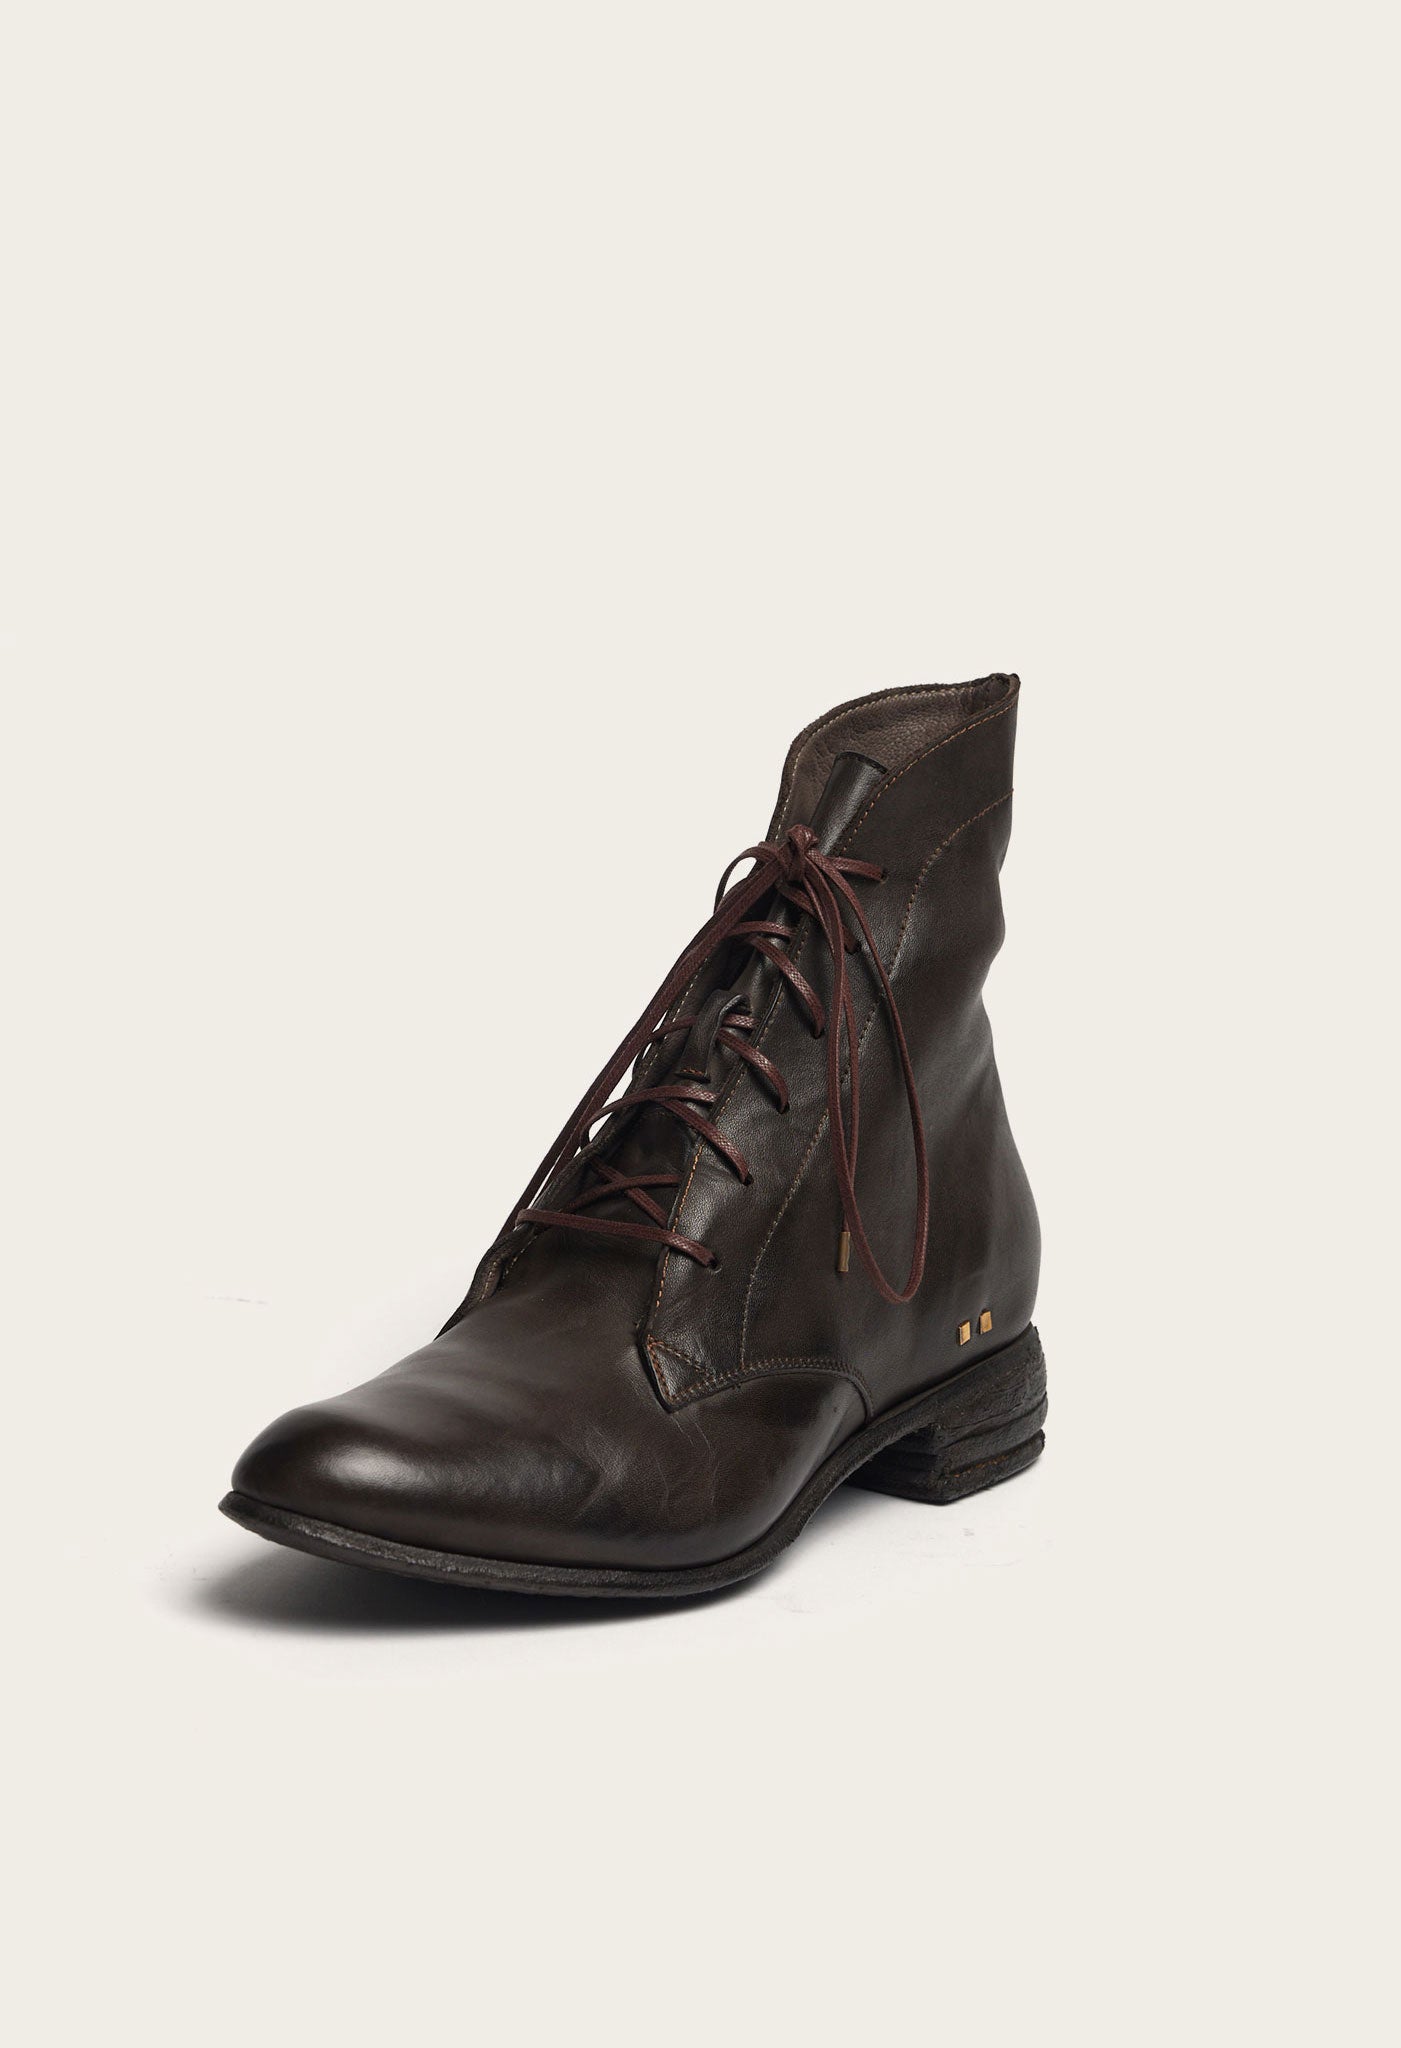 The Women's Mansfield: Coffee Leather